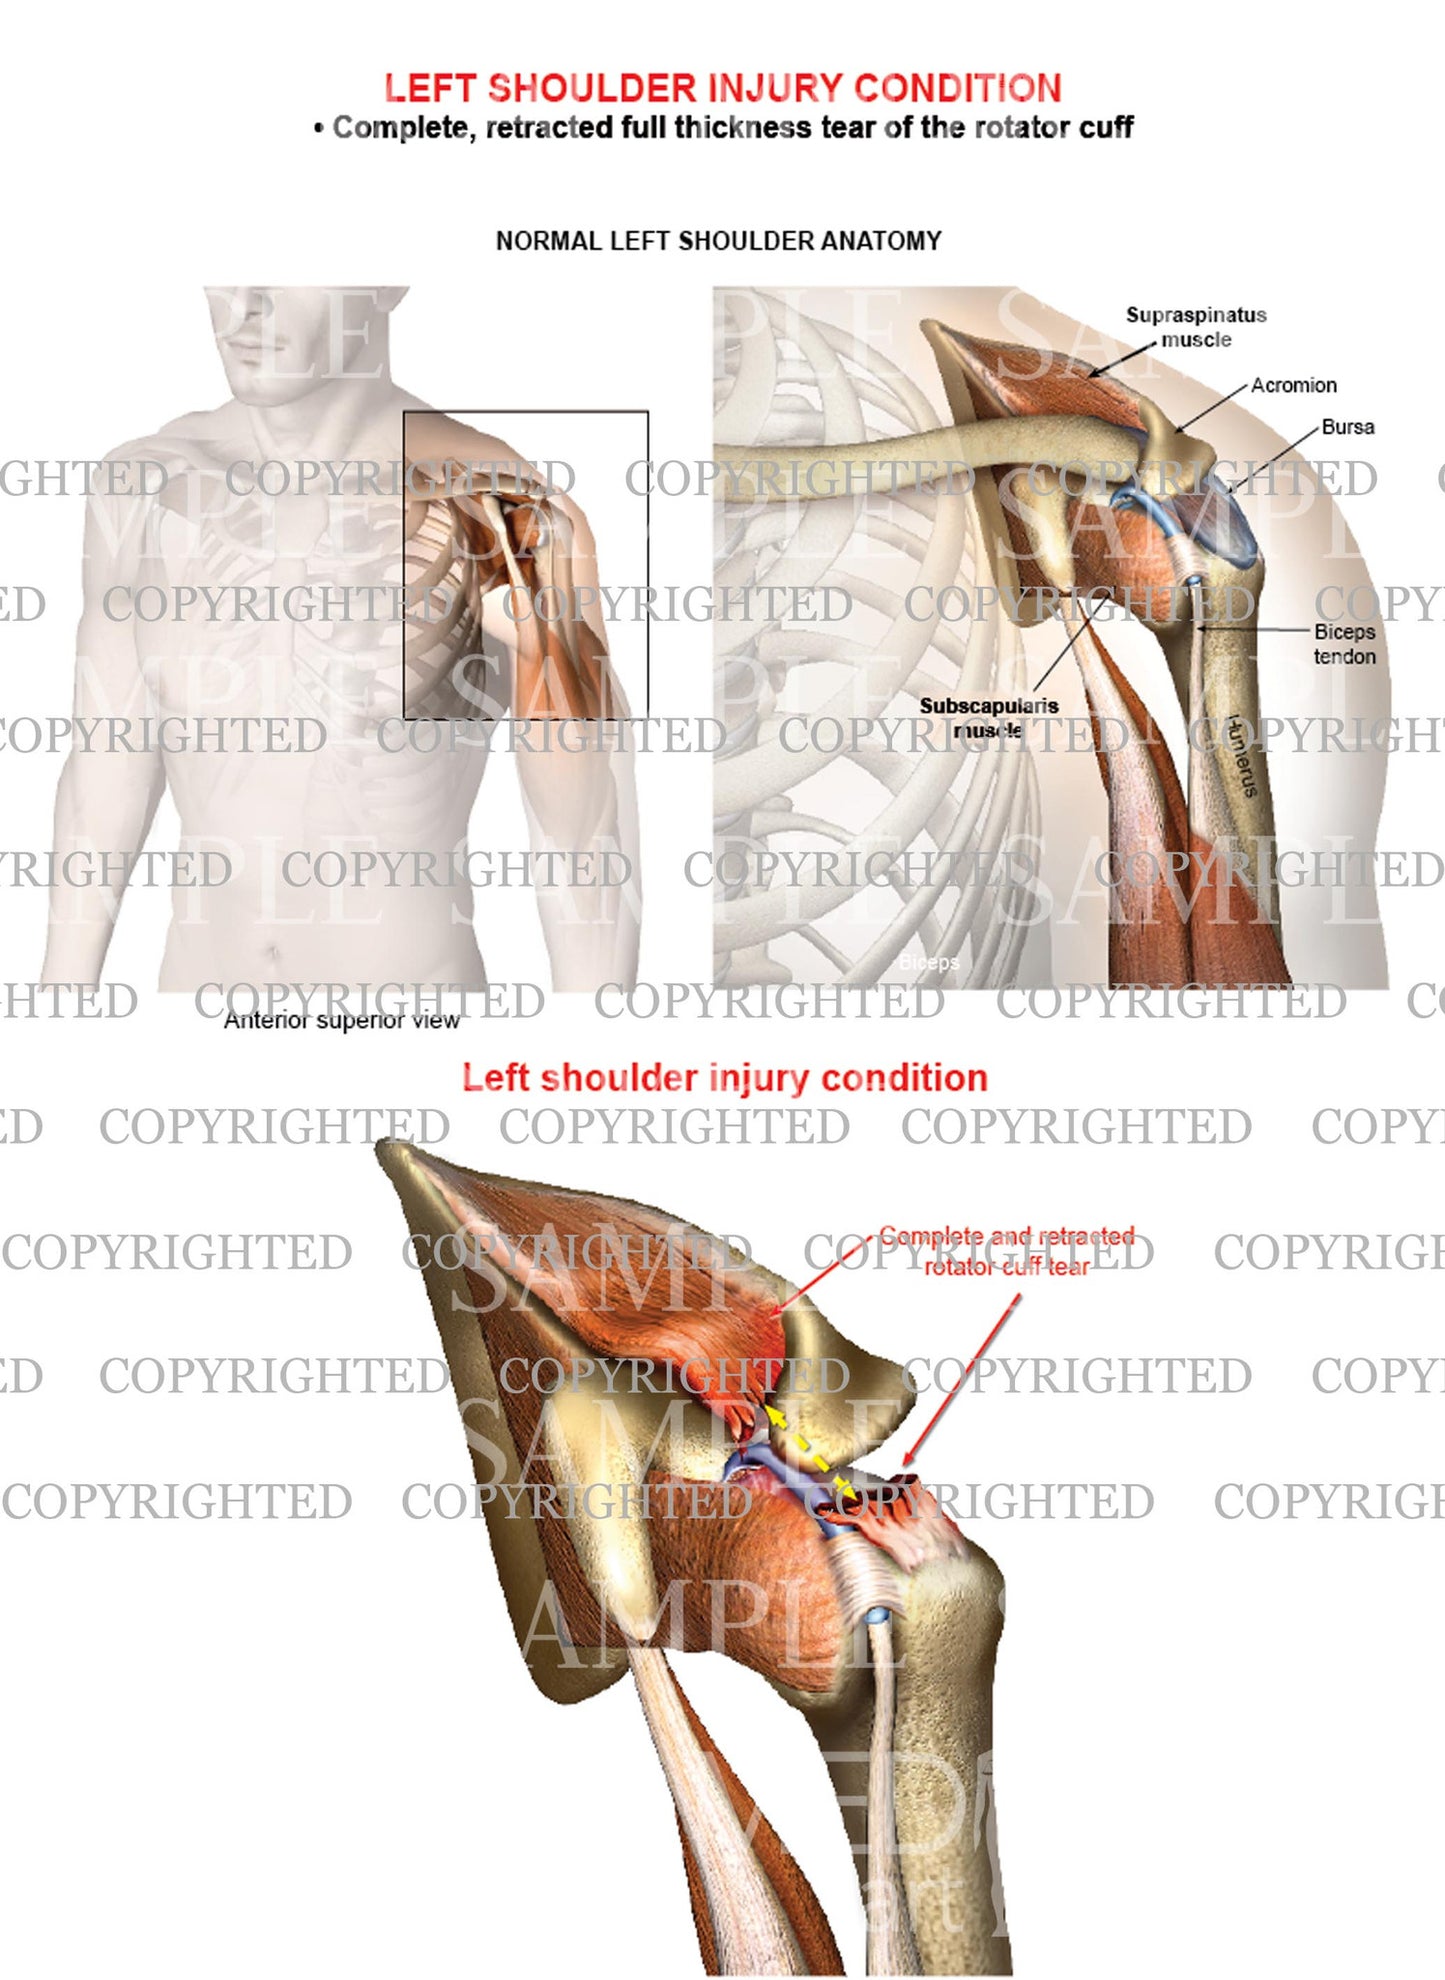 Left shoulder rotator cuff complete retracted tear - Male